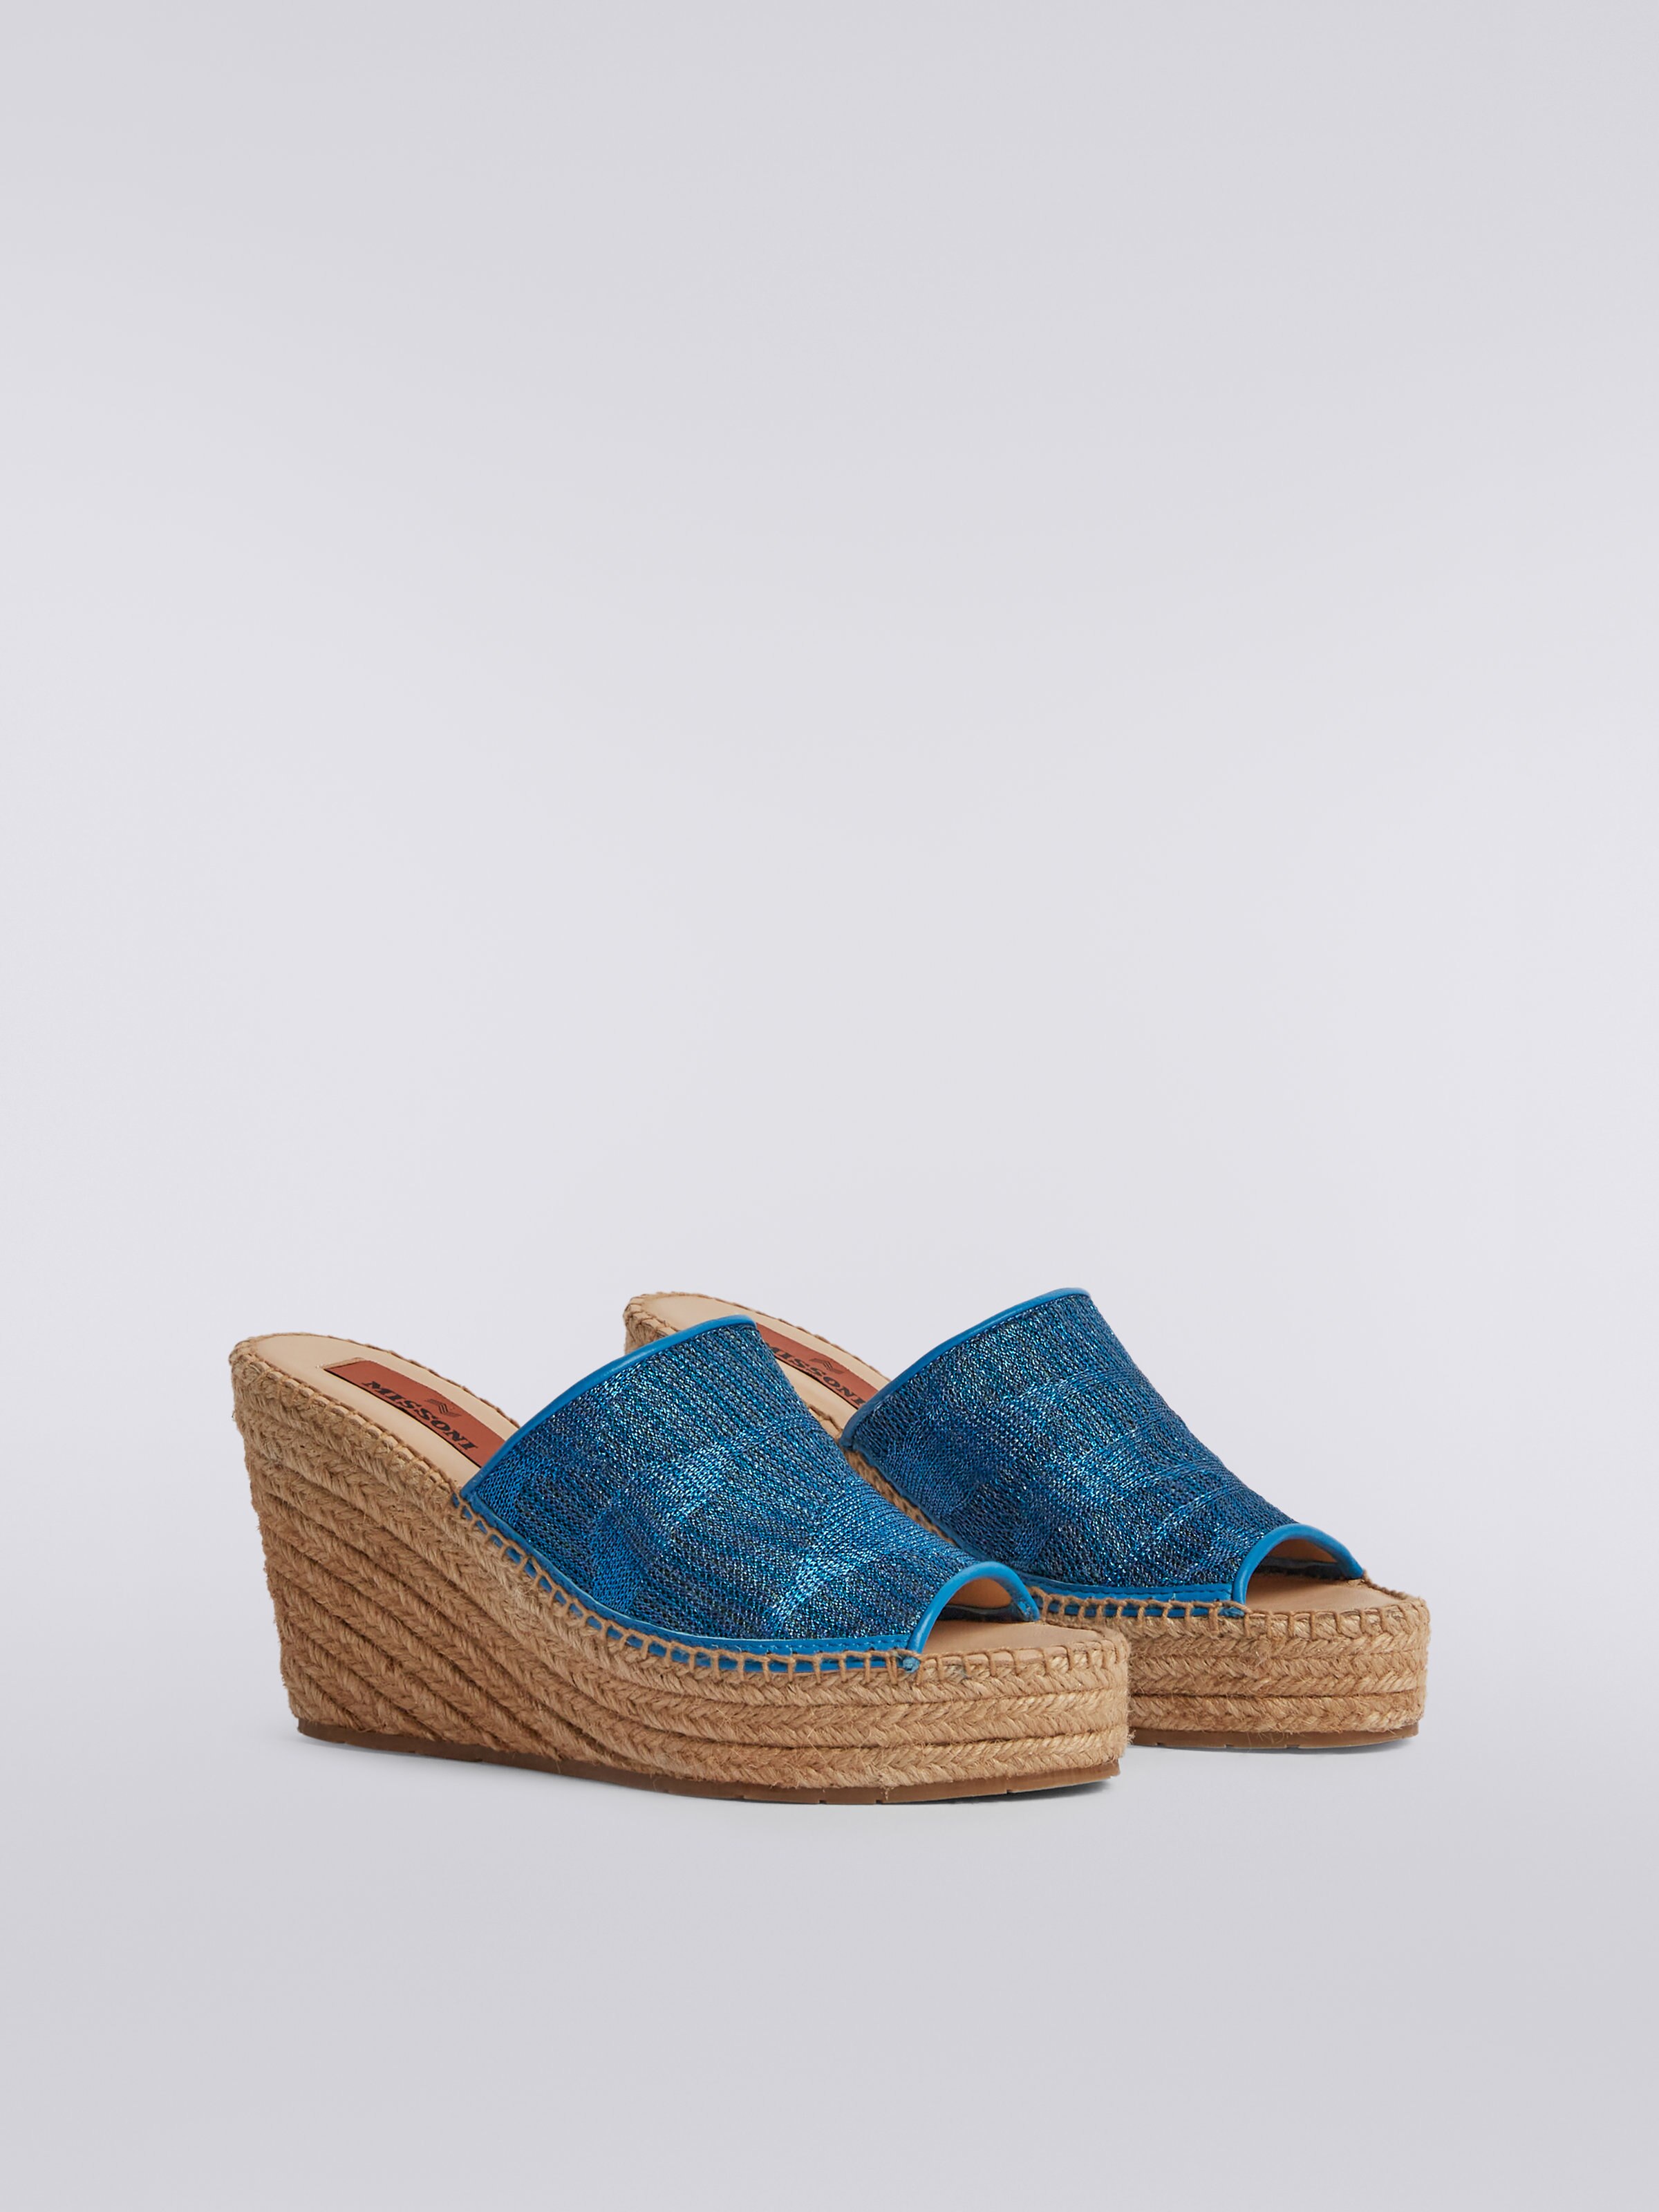 Espadrilles with wedge and chevron knit band, Blue - 1